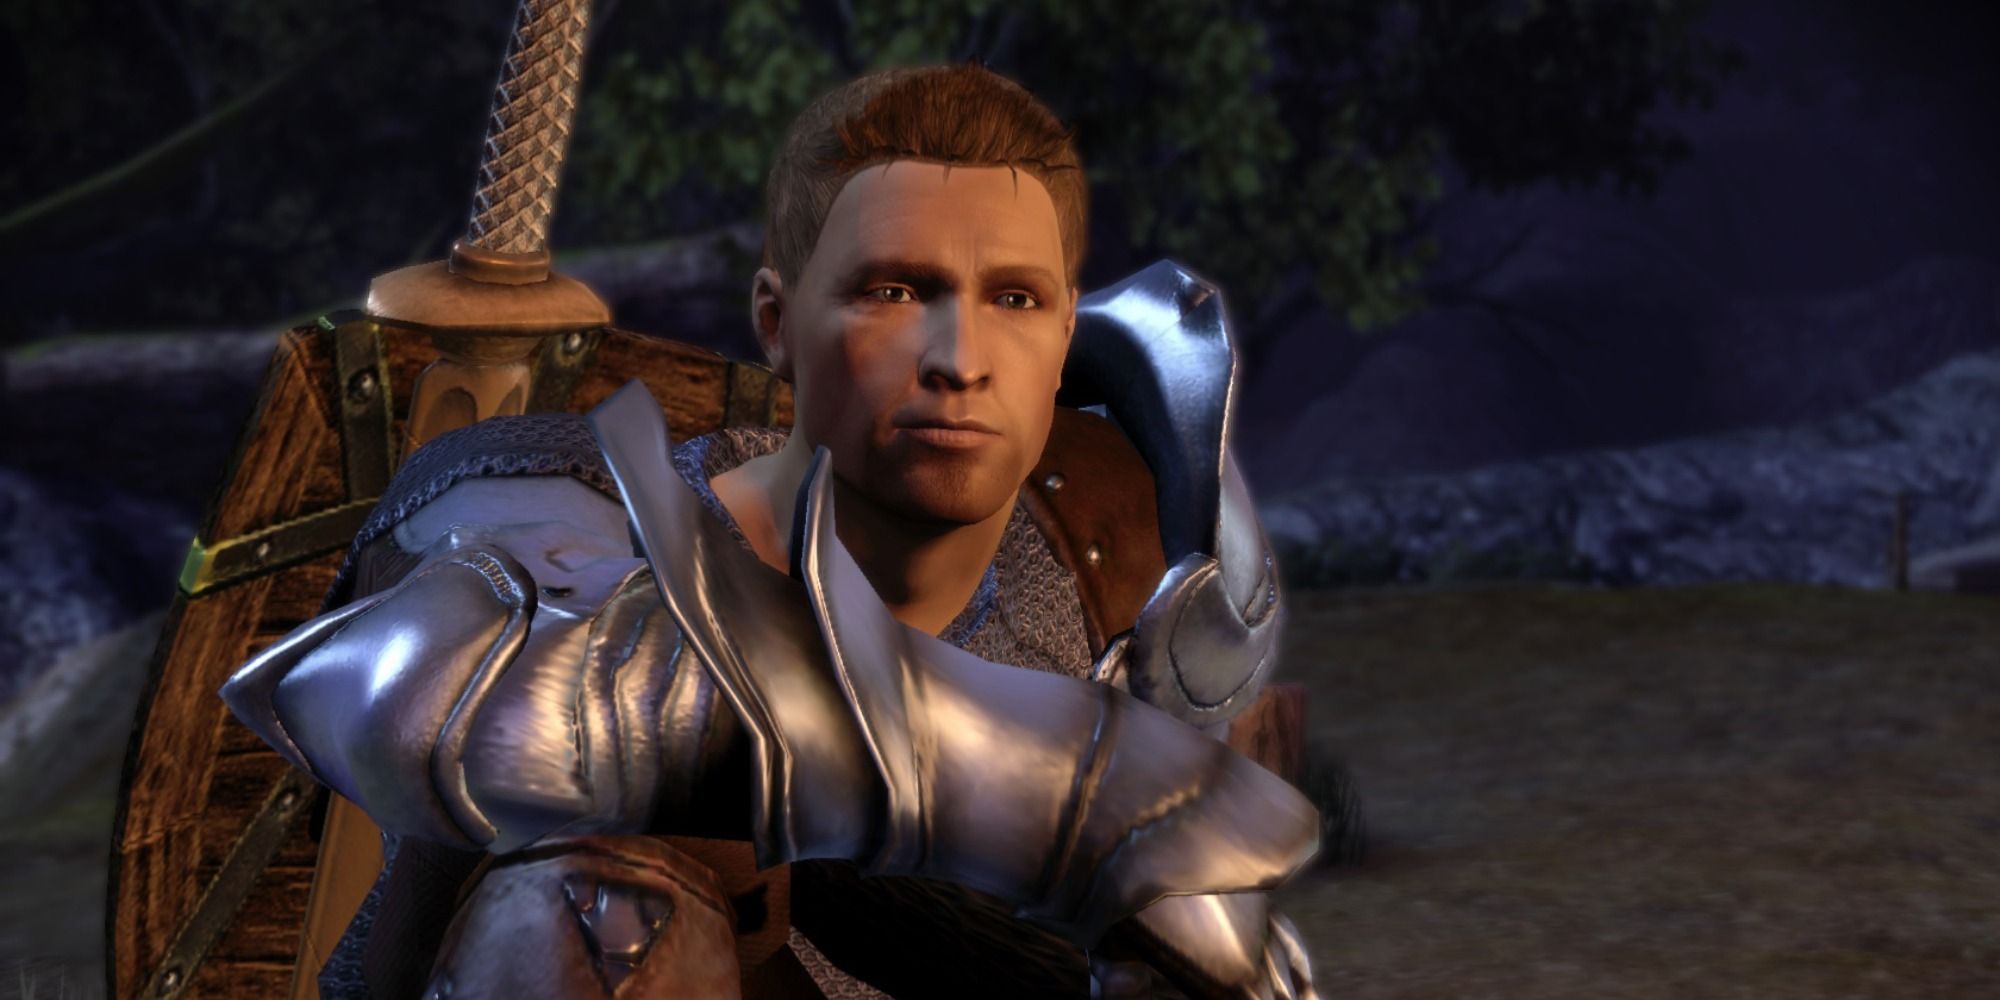 Alistair talks to the Warden at camp